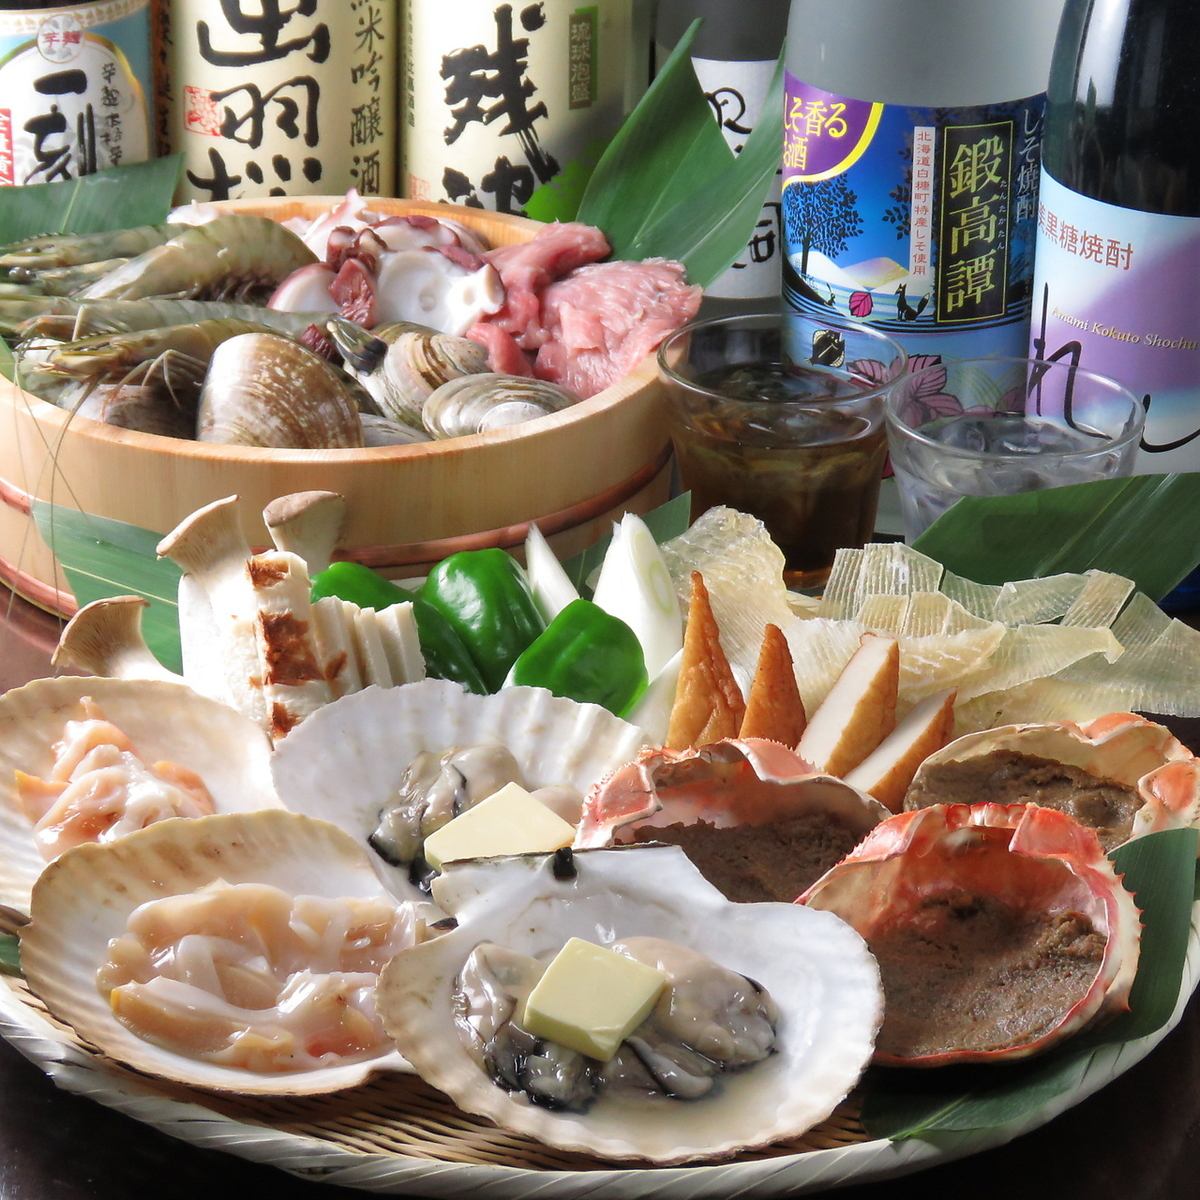 Very popular with students! All-you-can-eat Torohachi specialty course for 2,980 yen!